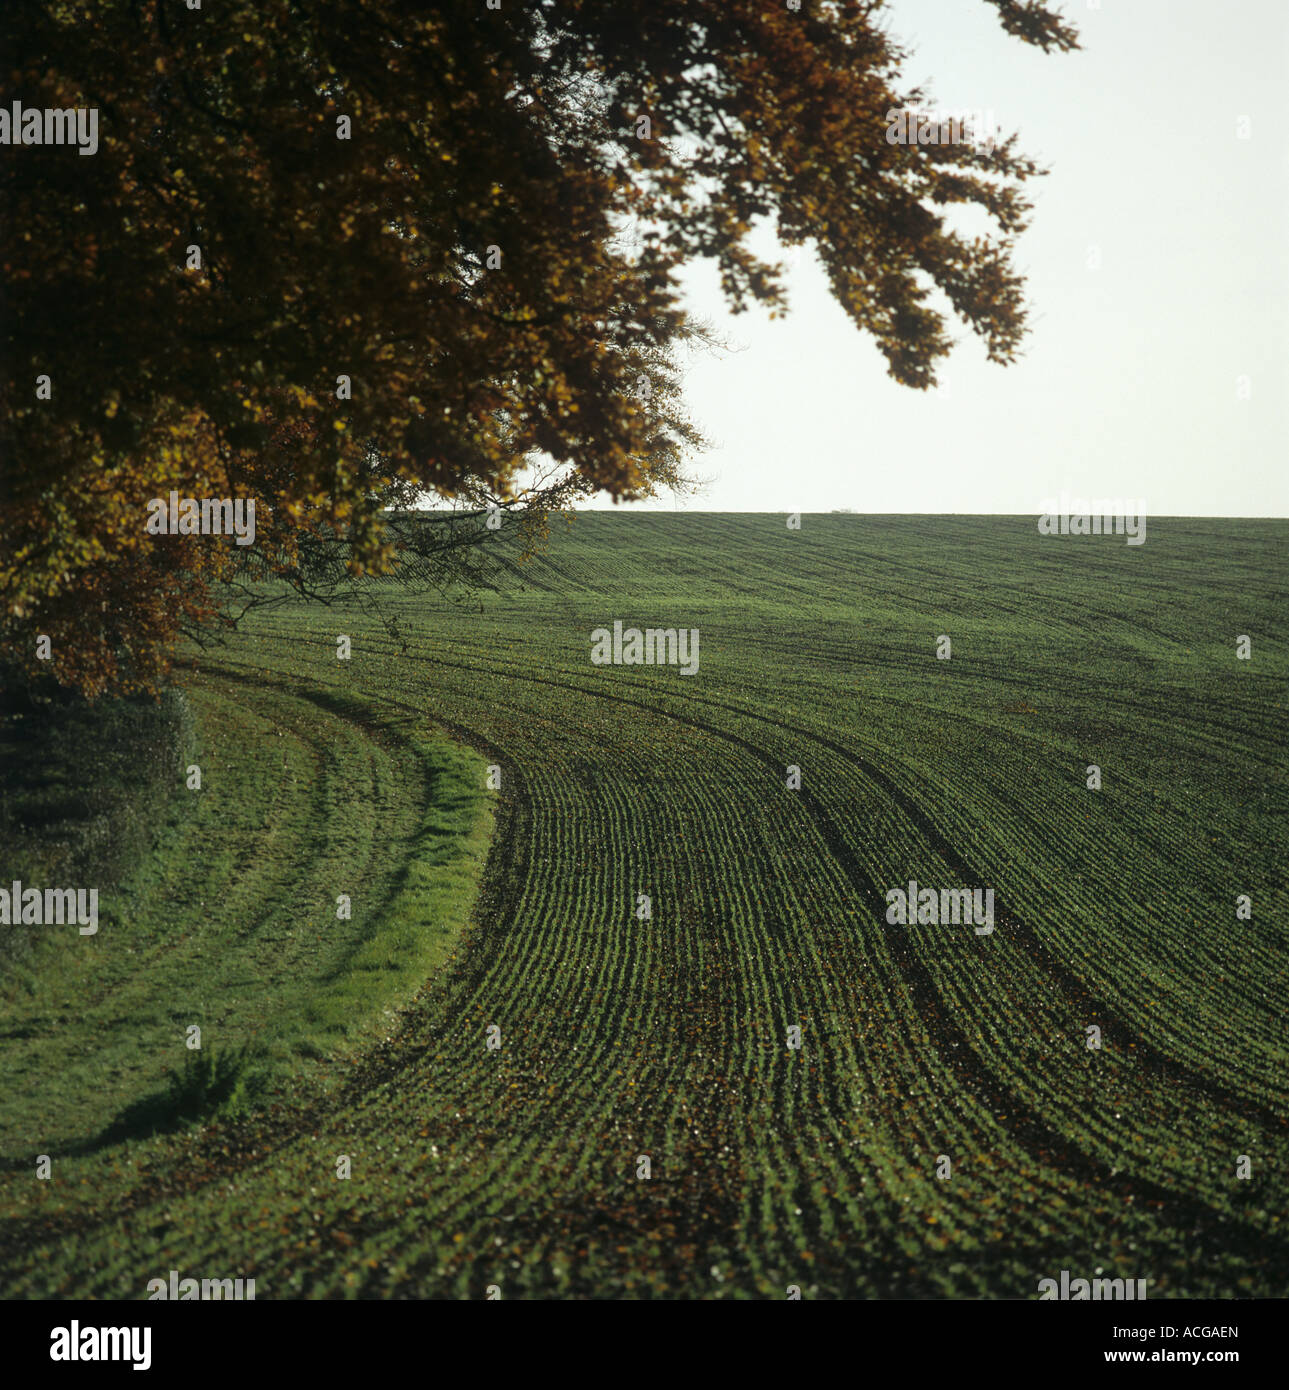 Headland beech tree and drill rows of young seedling wheat in autumn Hampshire Stock Photo